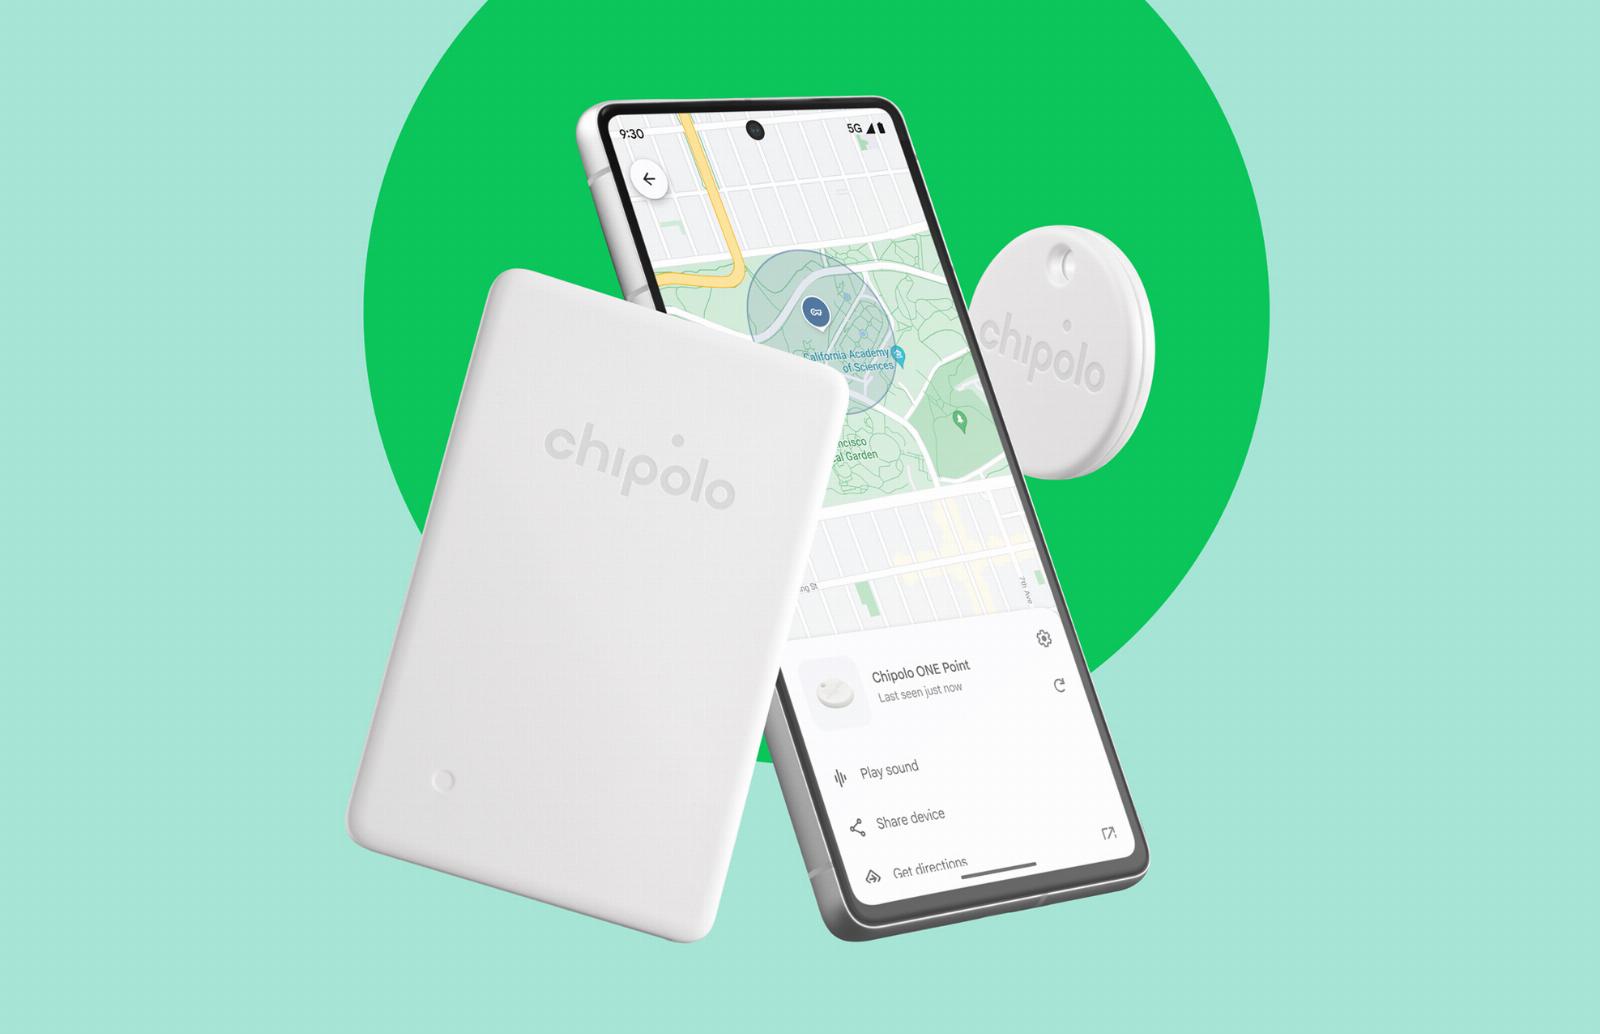 Chipolo brings its lost item trackers to Android’s Find My Device network